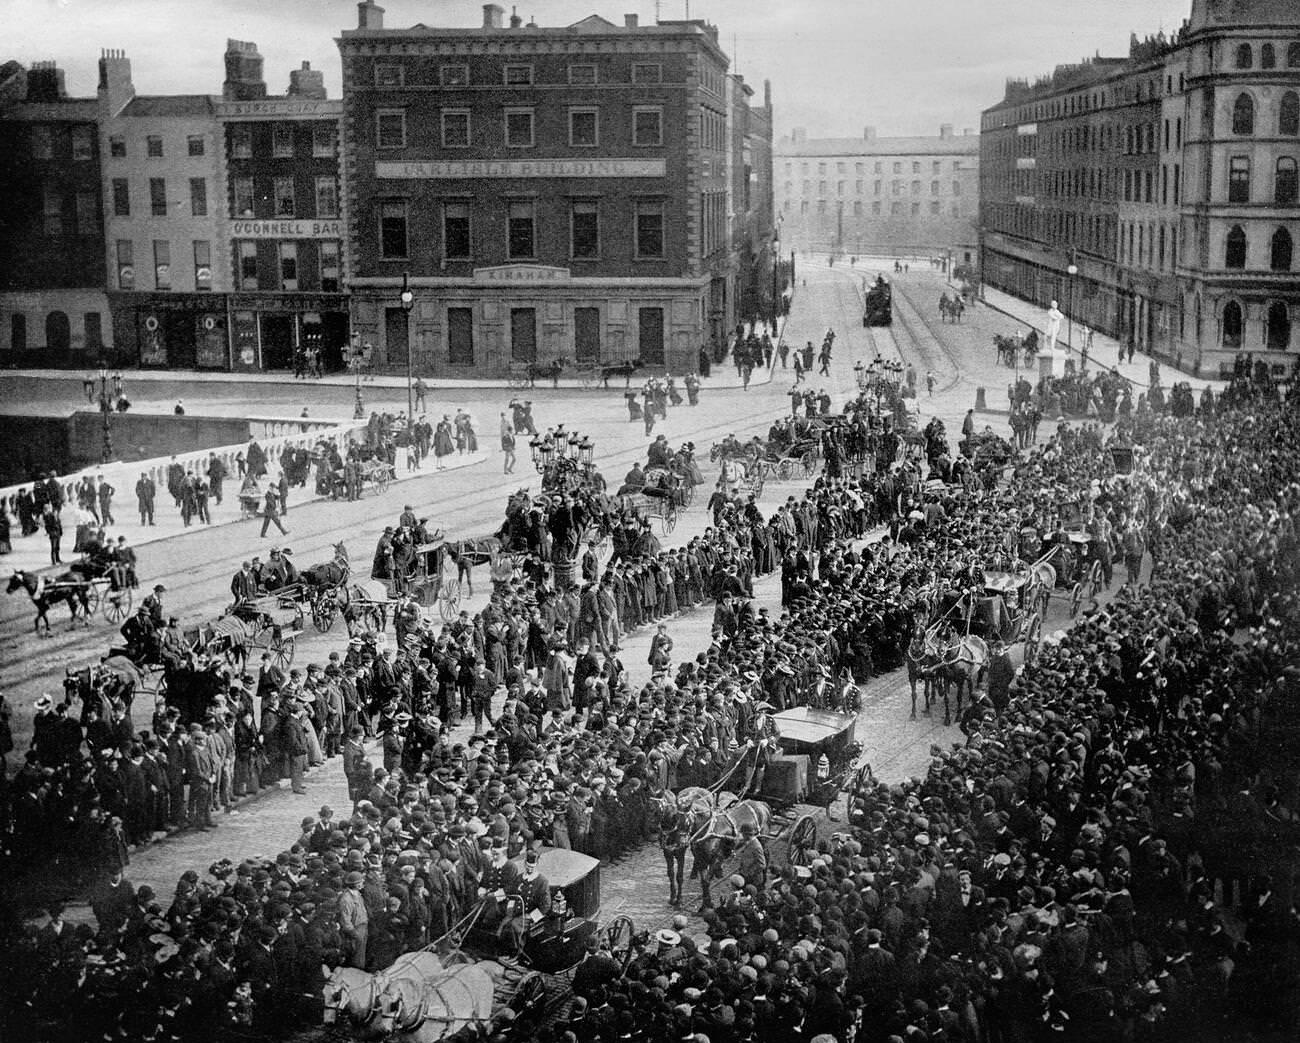 The Parnell Memorial Procession as it crosses the O'Connell Bridge over the River Liffey in Dublin